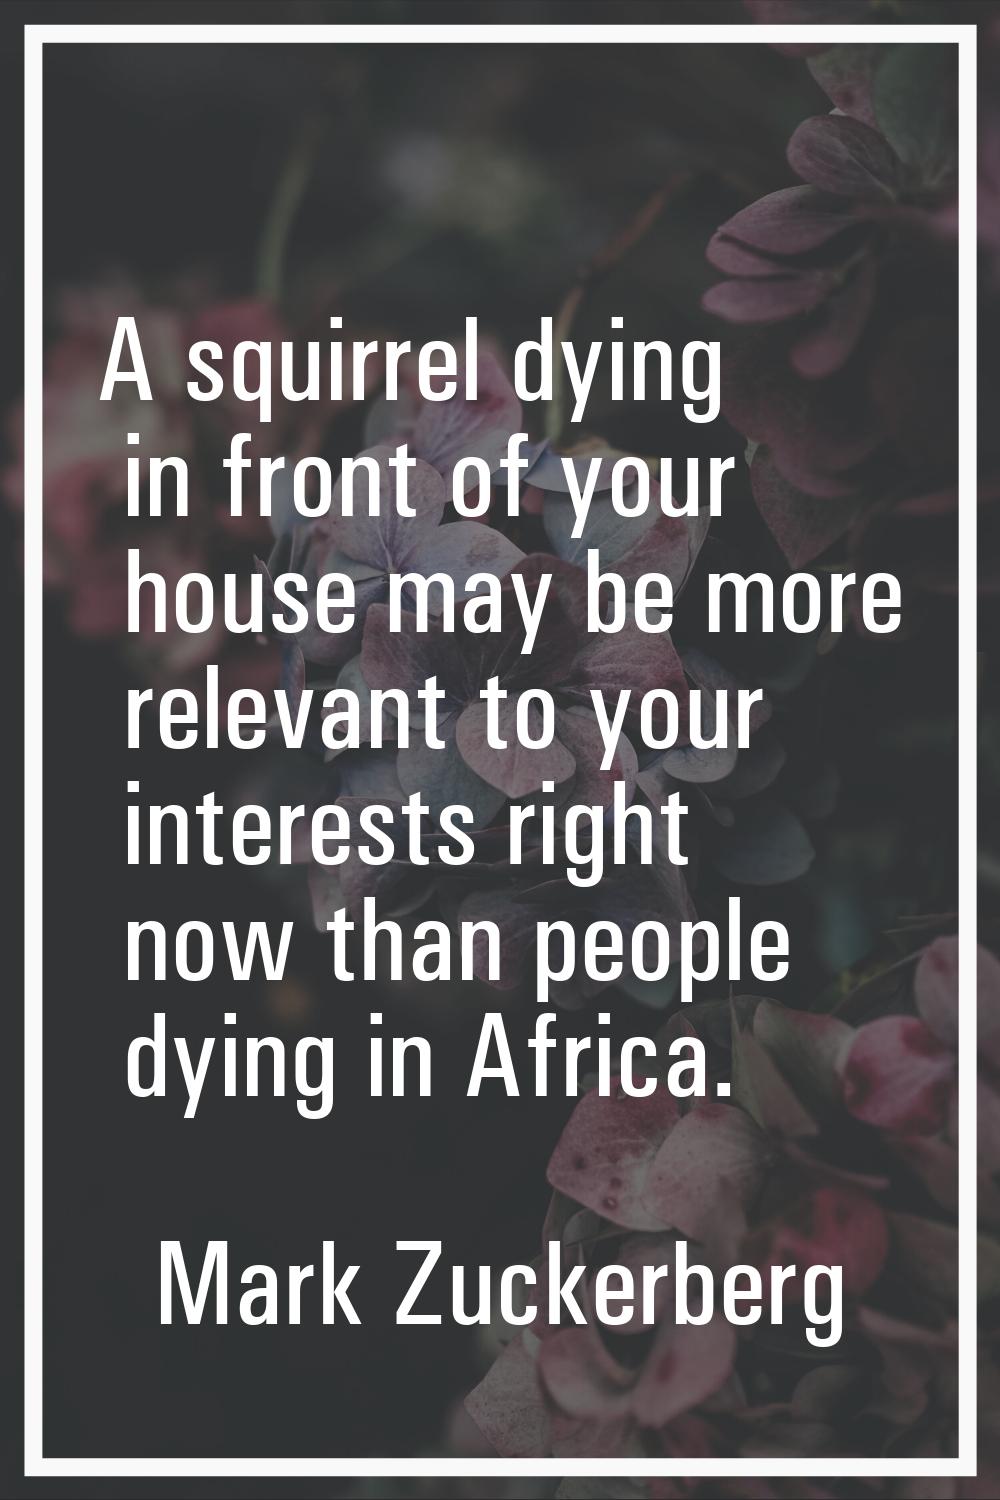 A squirrel dying in front of your house may be more relevant to your interests right now than peopl